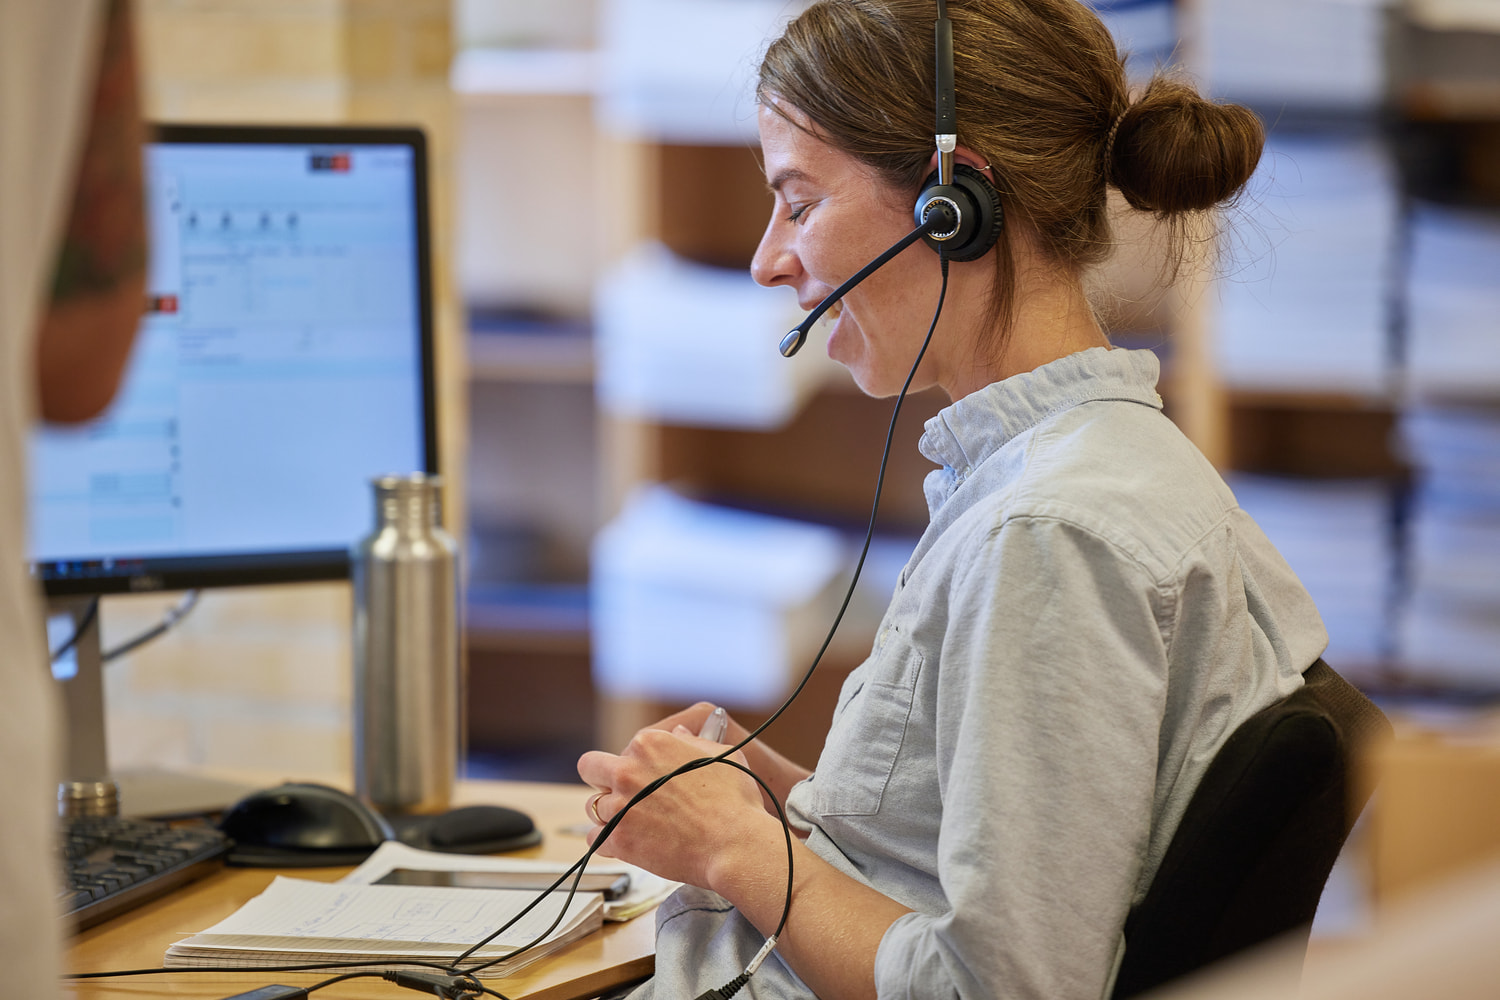 An employee from the communication team wearing headphones while sitting at a desk and talking with a customer.